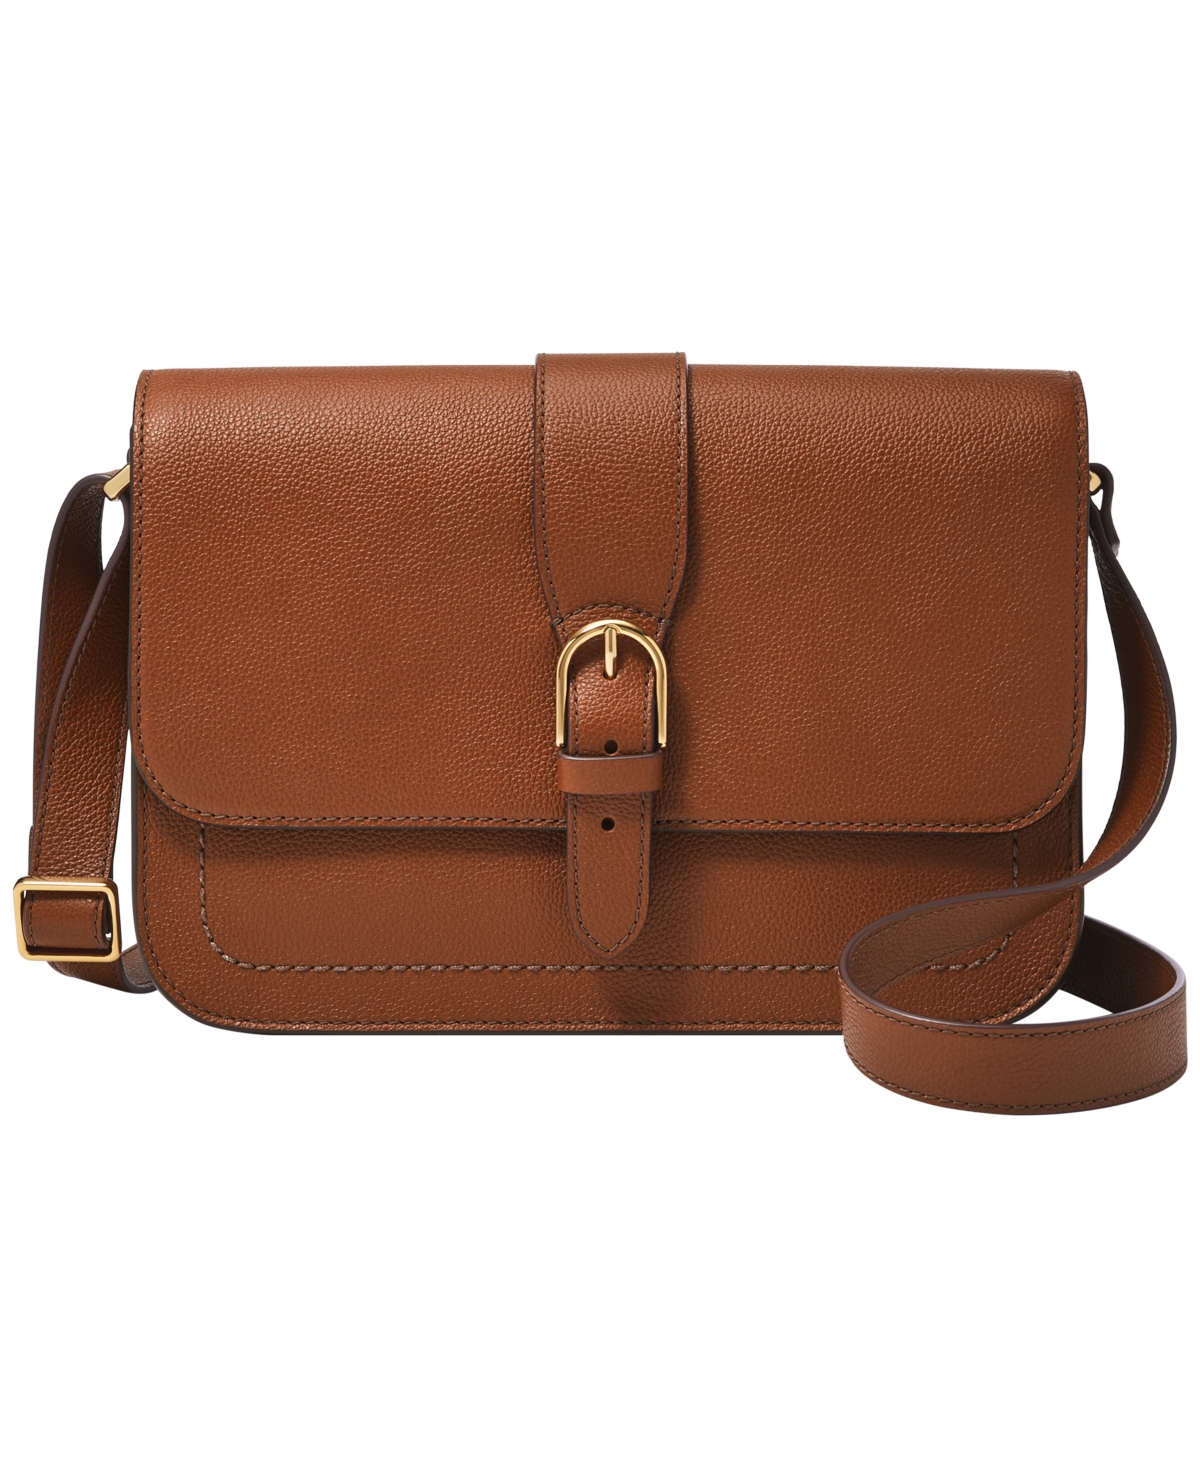 Fossil Zoey Leather Crossbody Bag In Medium Brown